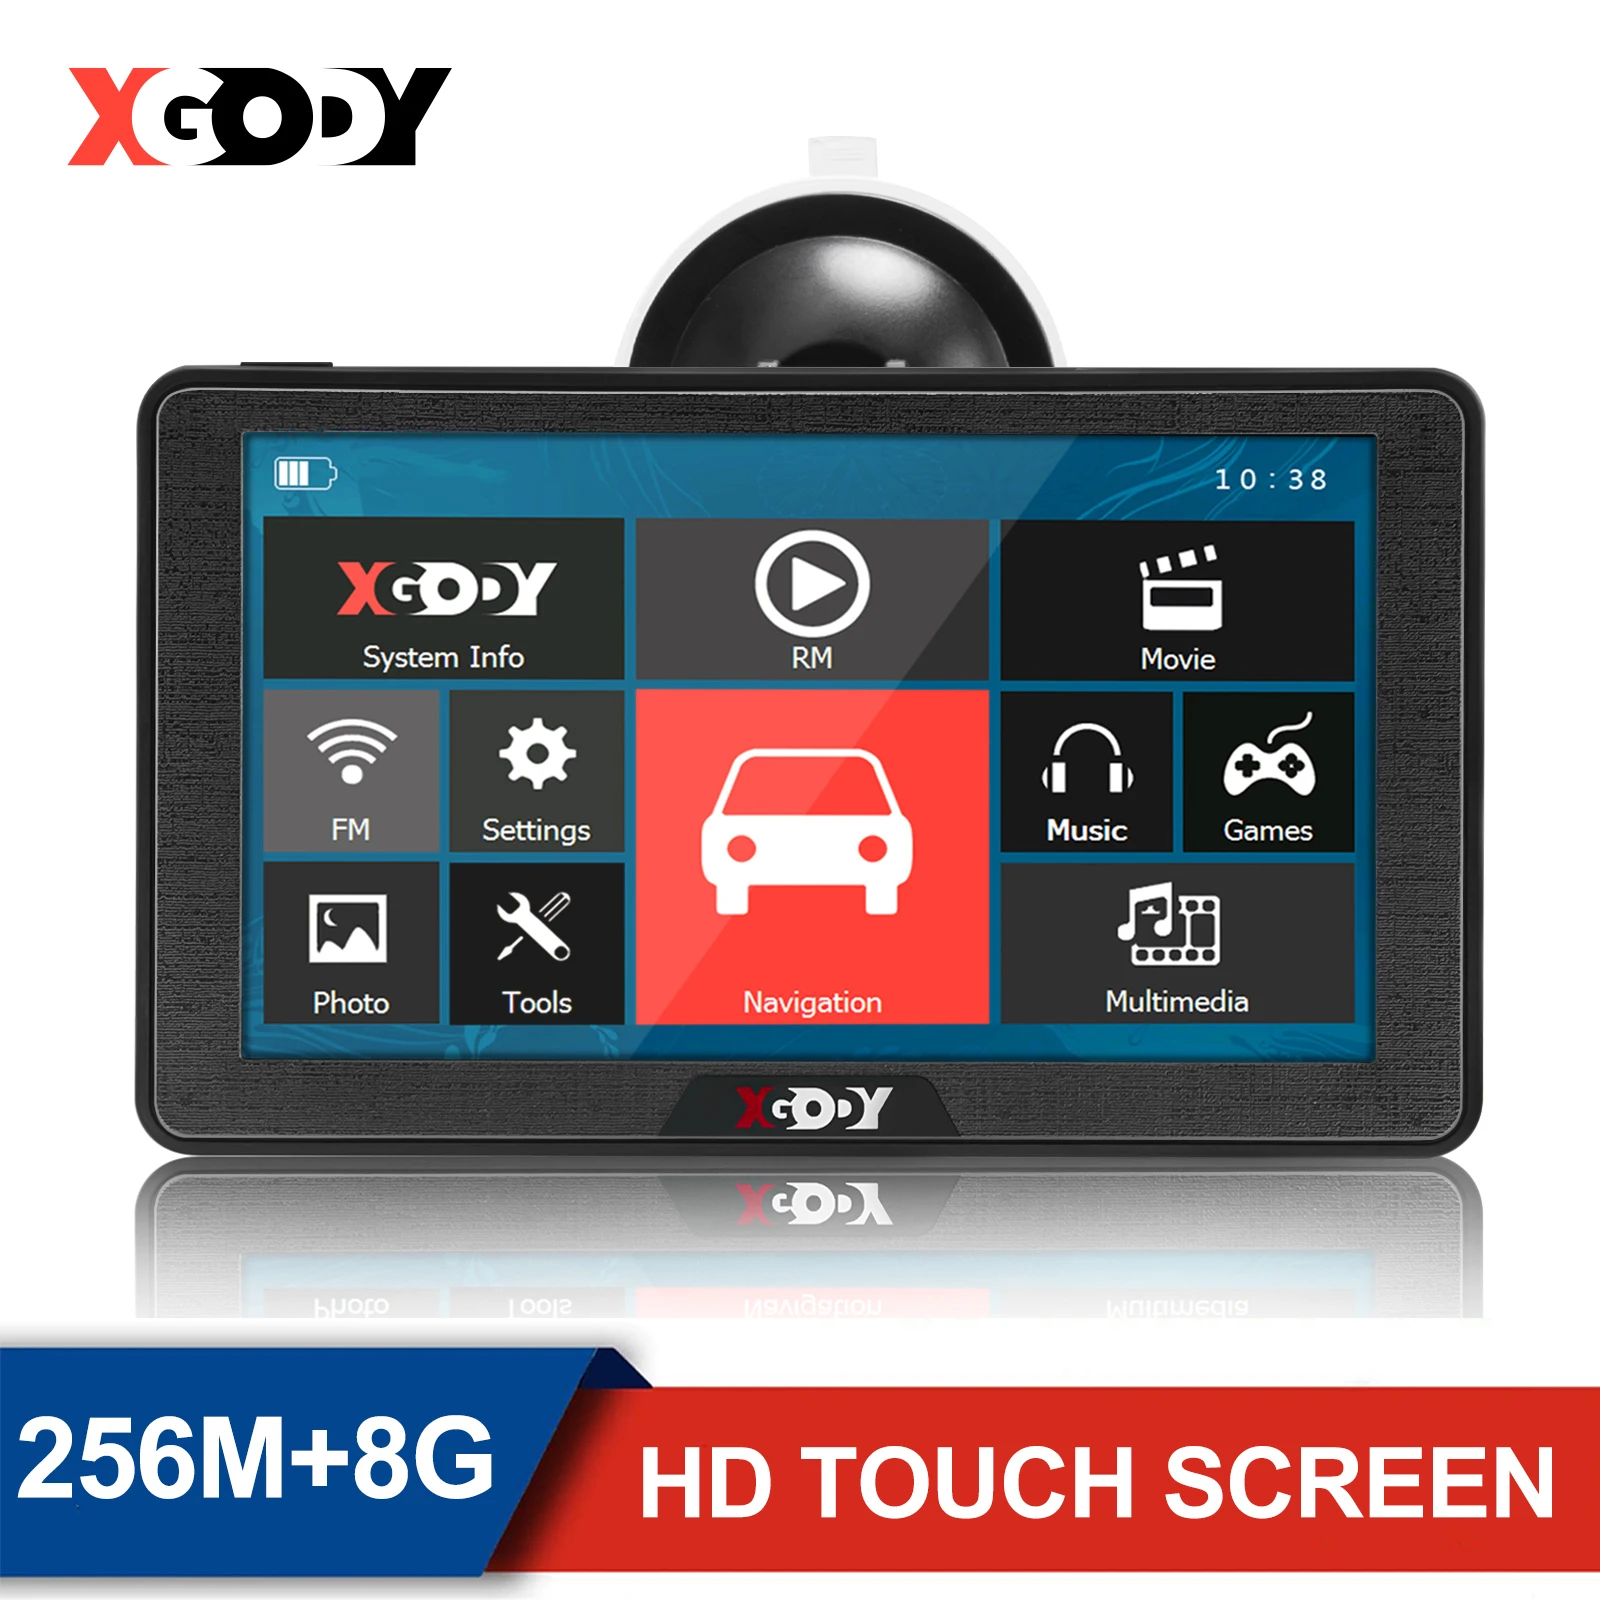 

XGODY GPS Navigator For Cars 7 Inch Navigation New 886 256MB +8GB Touch Screen Car GPS Navigation America Europe Map Free Update